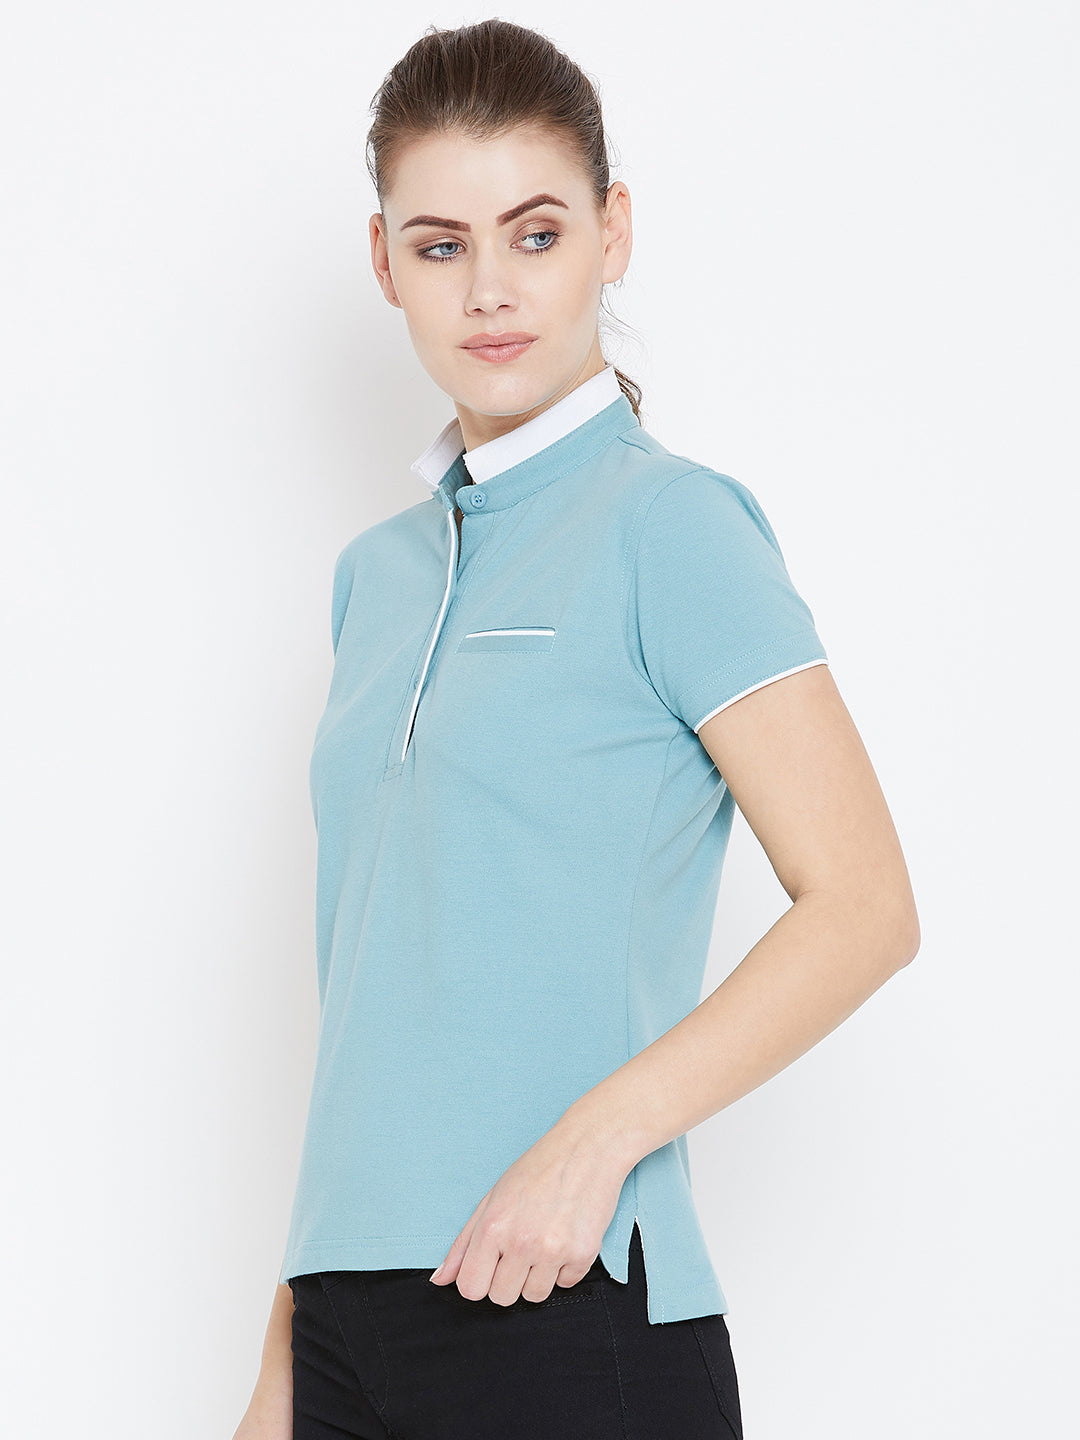 Women Blue Solid Casual Polo T-shirts - JUMP USA